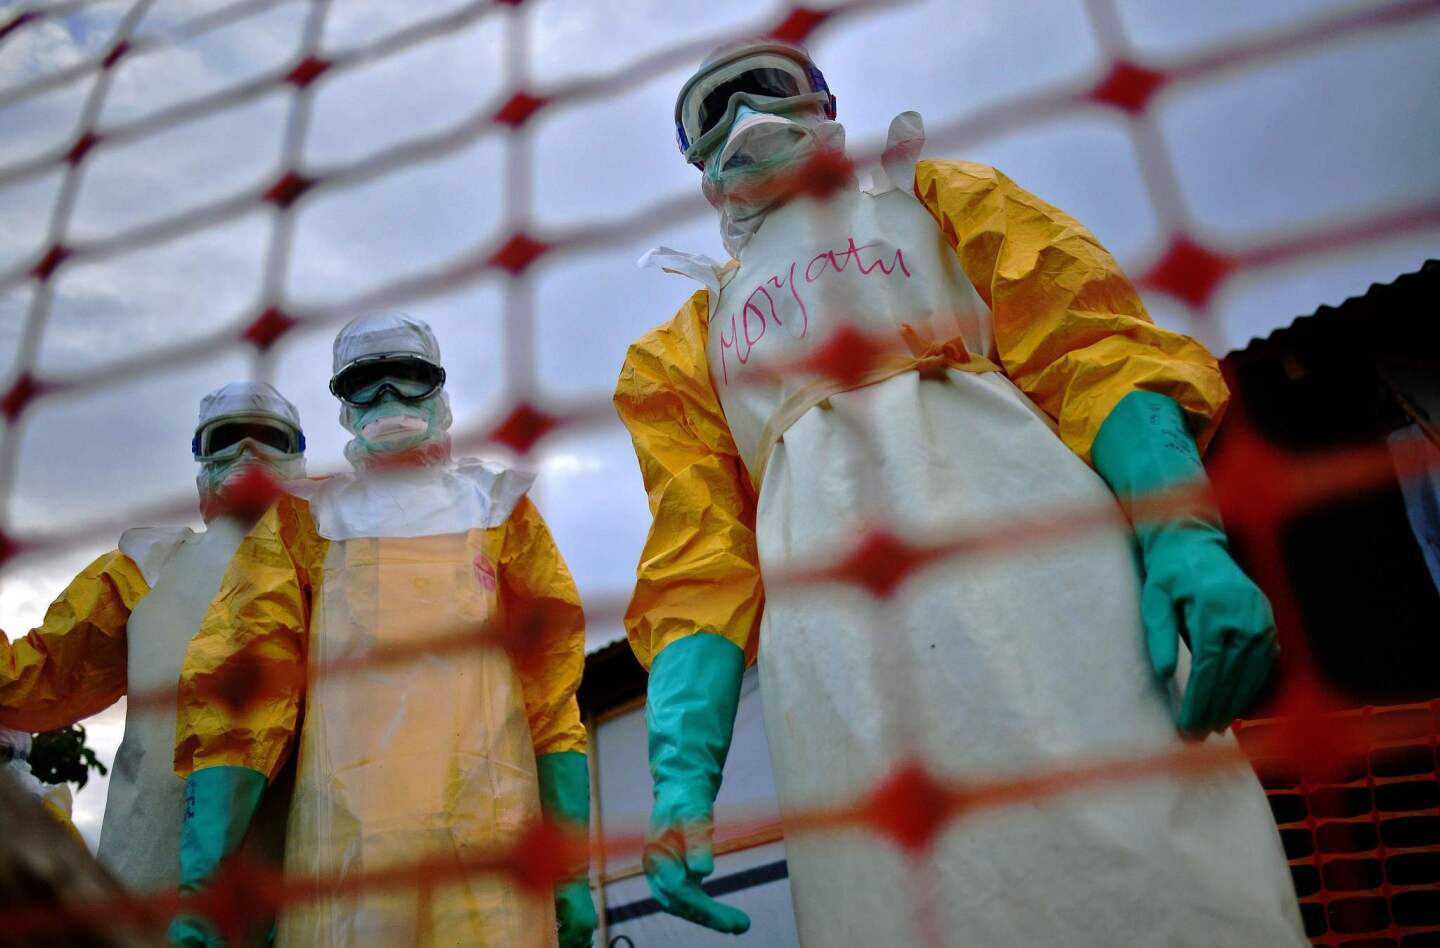 Medecins Sans Frontieres medical staff members wearing protective clothing treat the body of an Ebola victim at their facility in Kailahun, Sierra Leone, on Aug. 14, 2014.